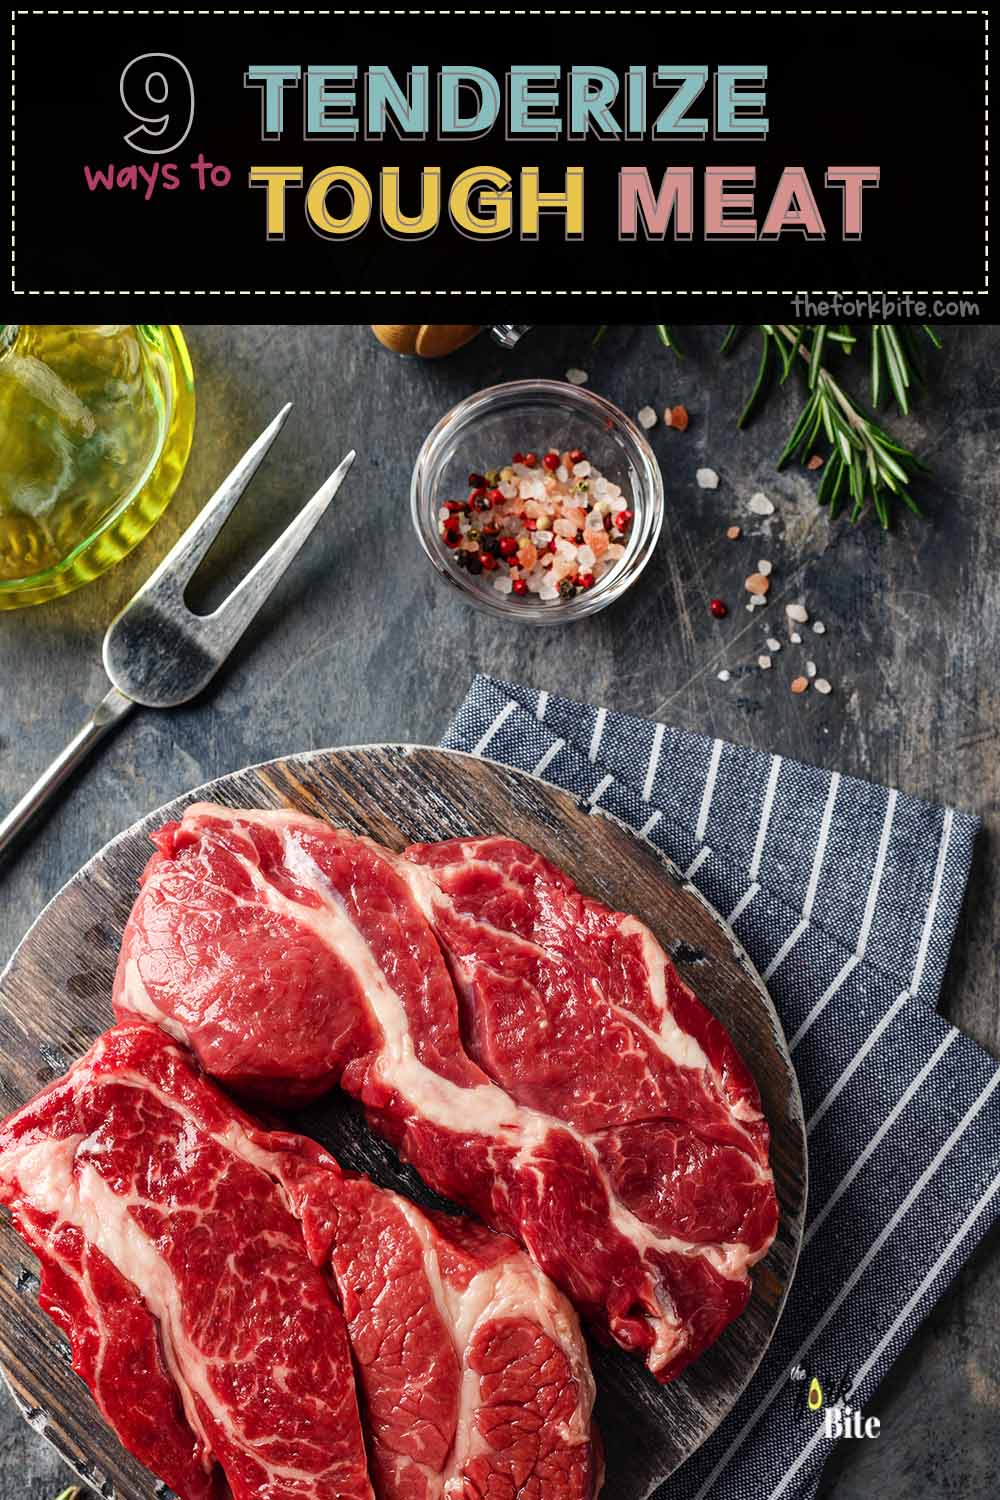 Would you like to learn a few tricks on how to tenderize beef, steak, and other meats so that you can buy meat safely in the knowledge that it will be tender when you come to eat it?